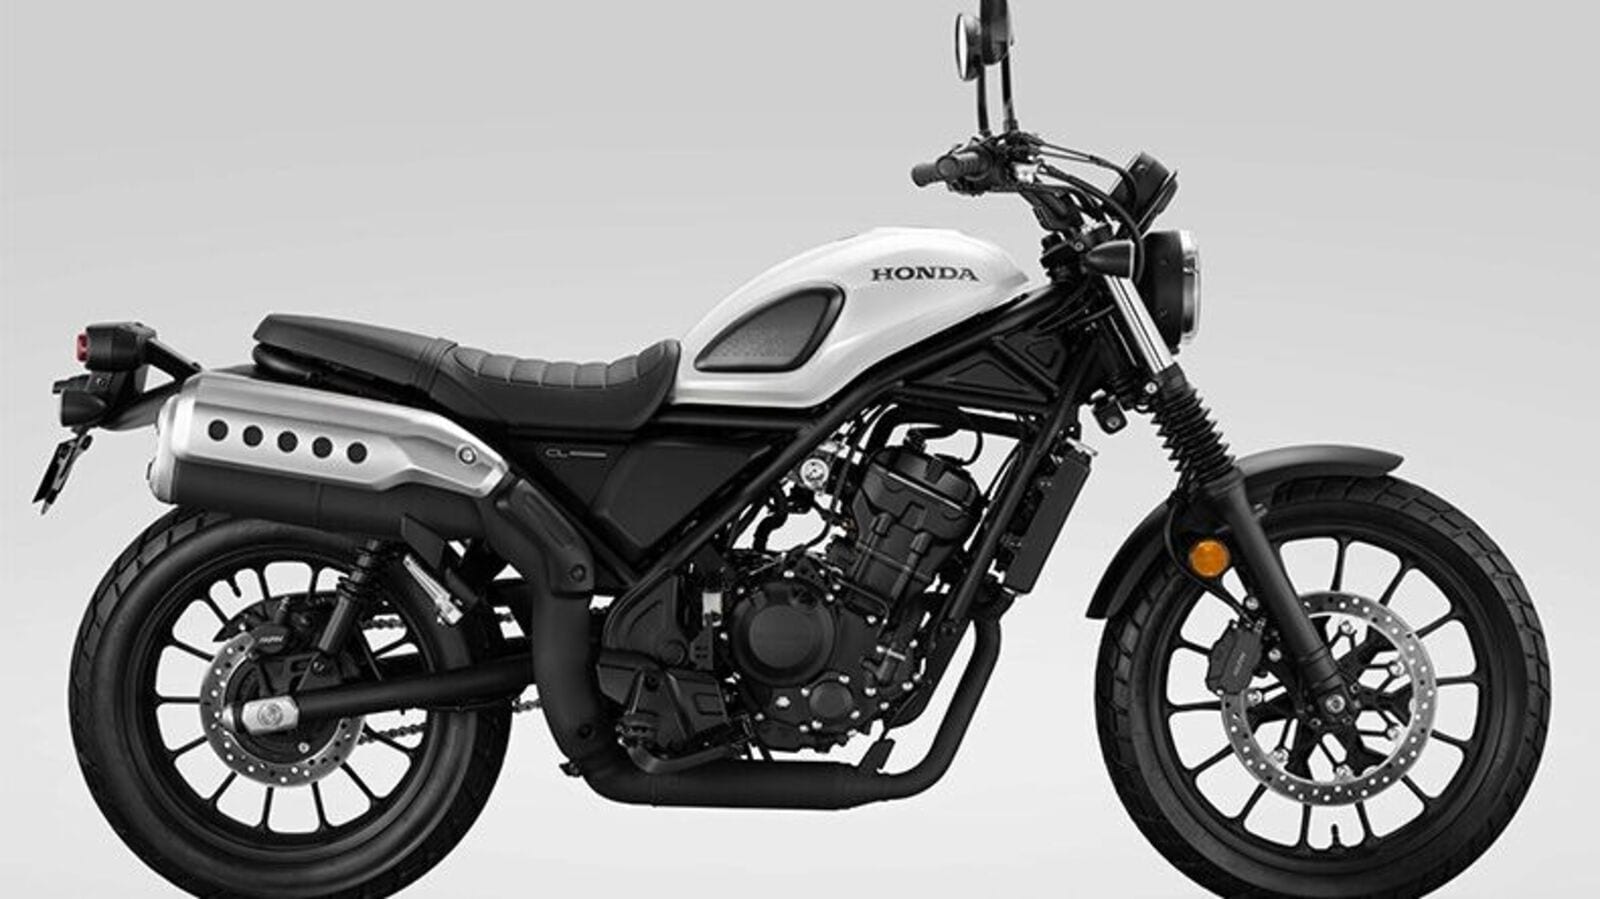 Honda CL300 scrambler unveiled: Will it come to India?